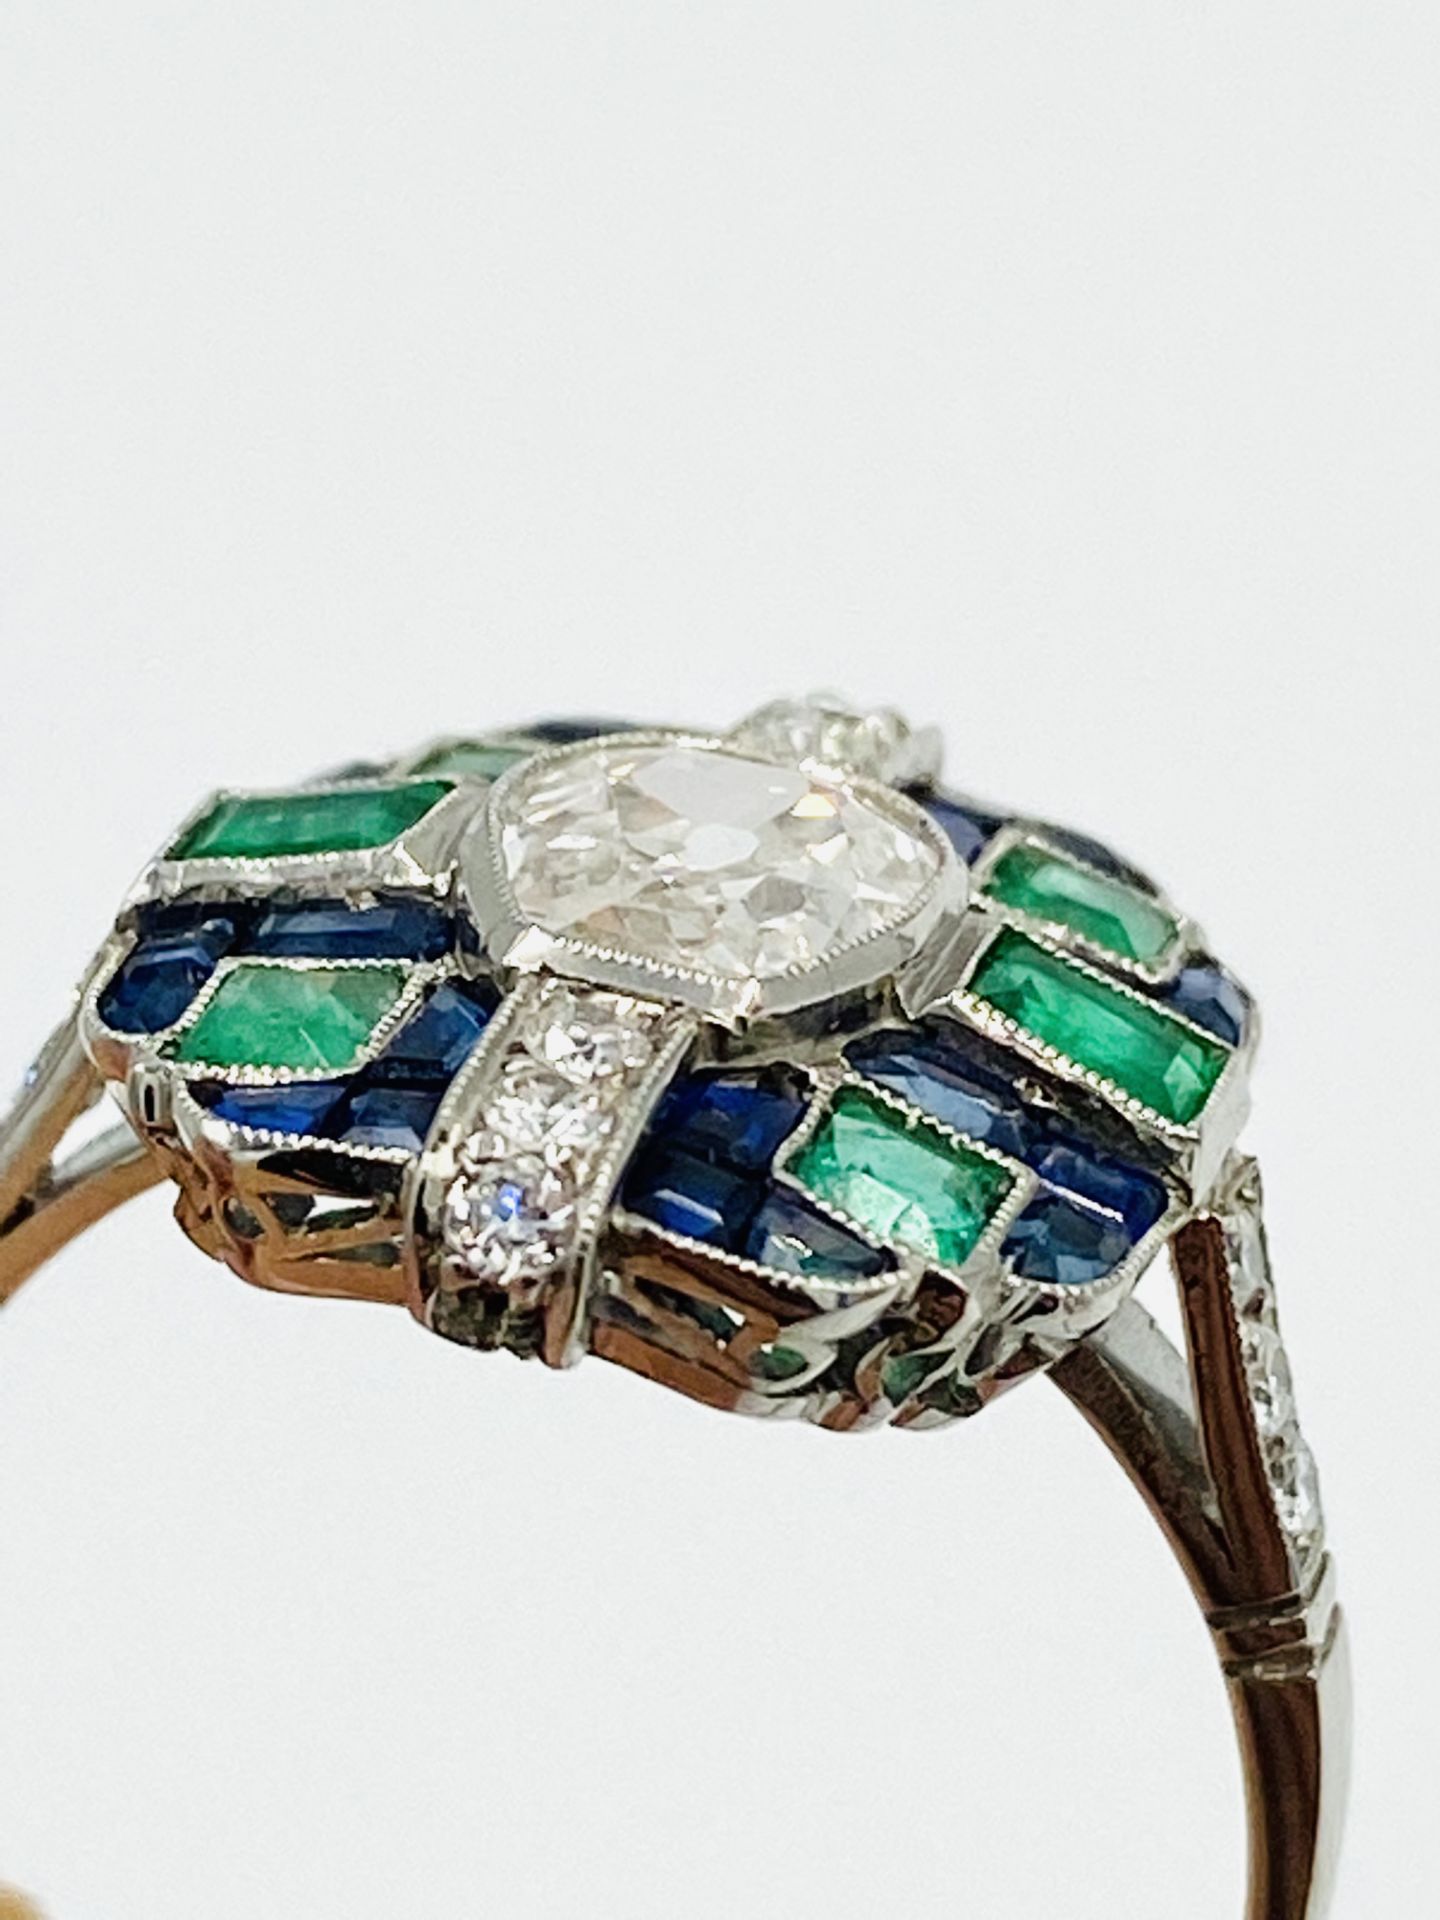 Platinum ring set with diamonds, sapphires and emeralds - Image 5 of 5